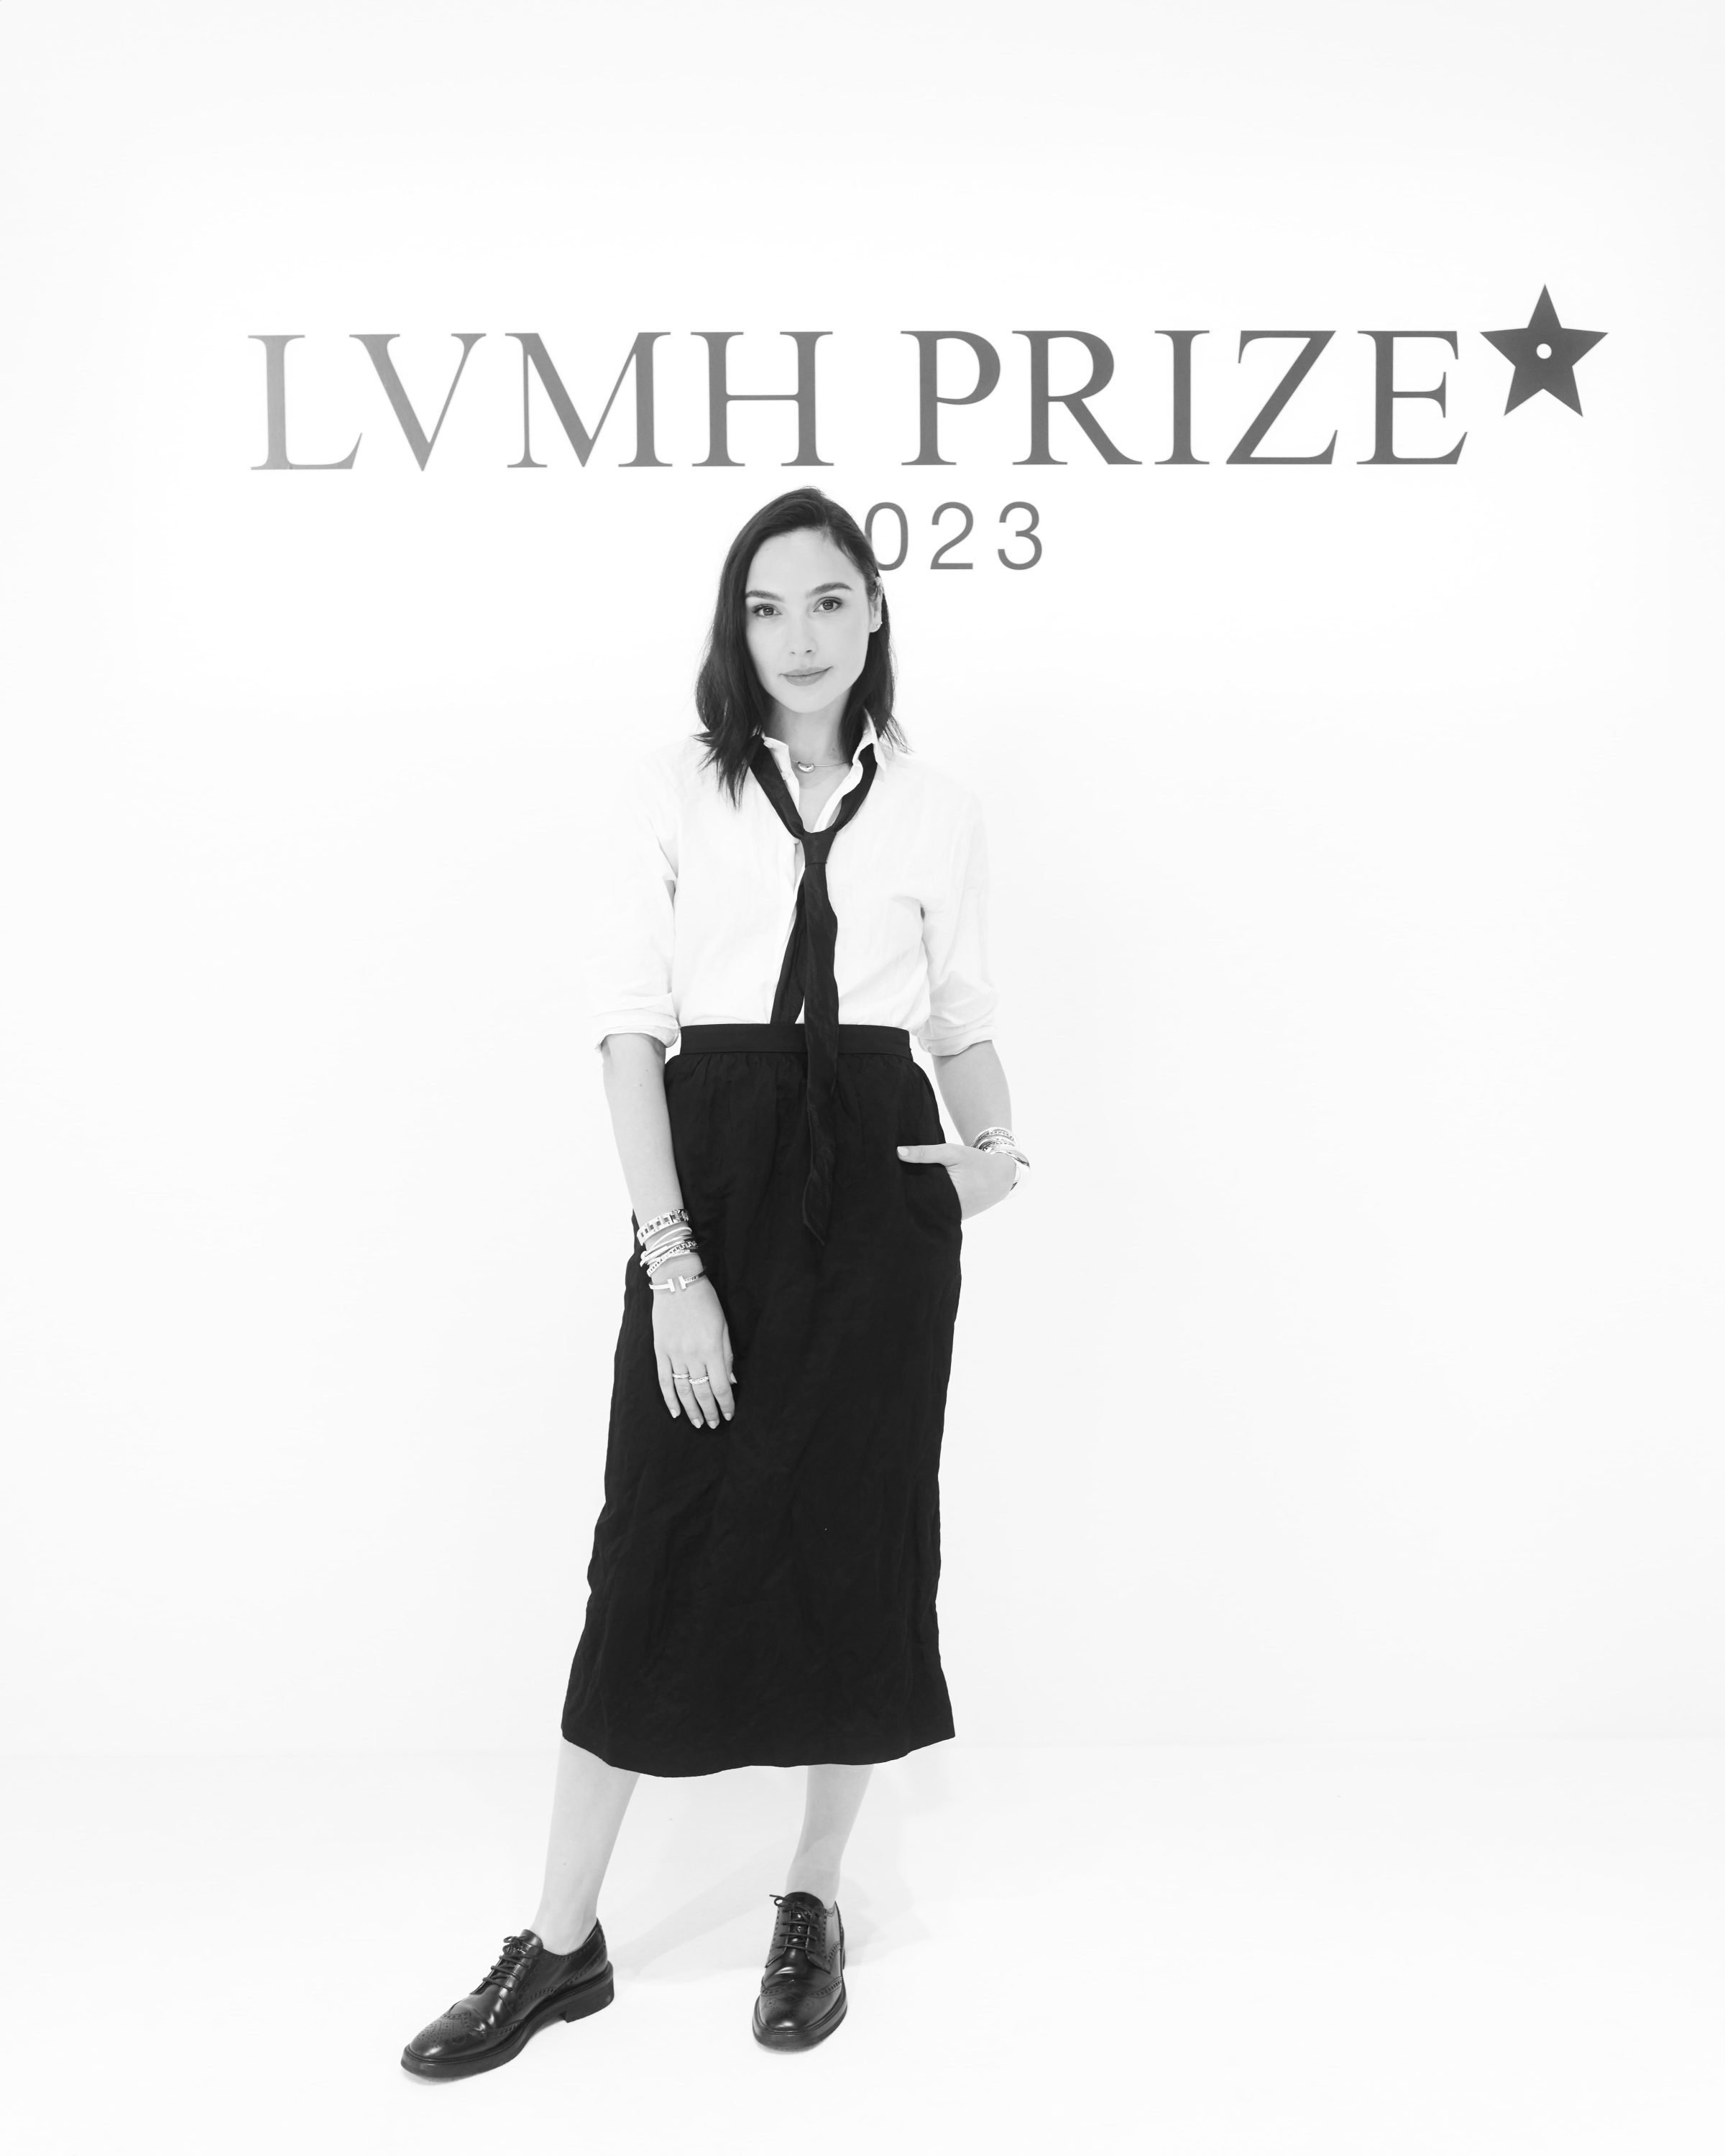 LVMH Prize Semifinalists 2023: Meet Luar, Magliano, and More